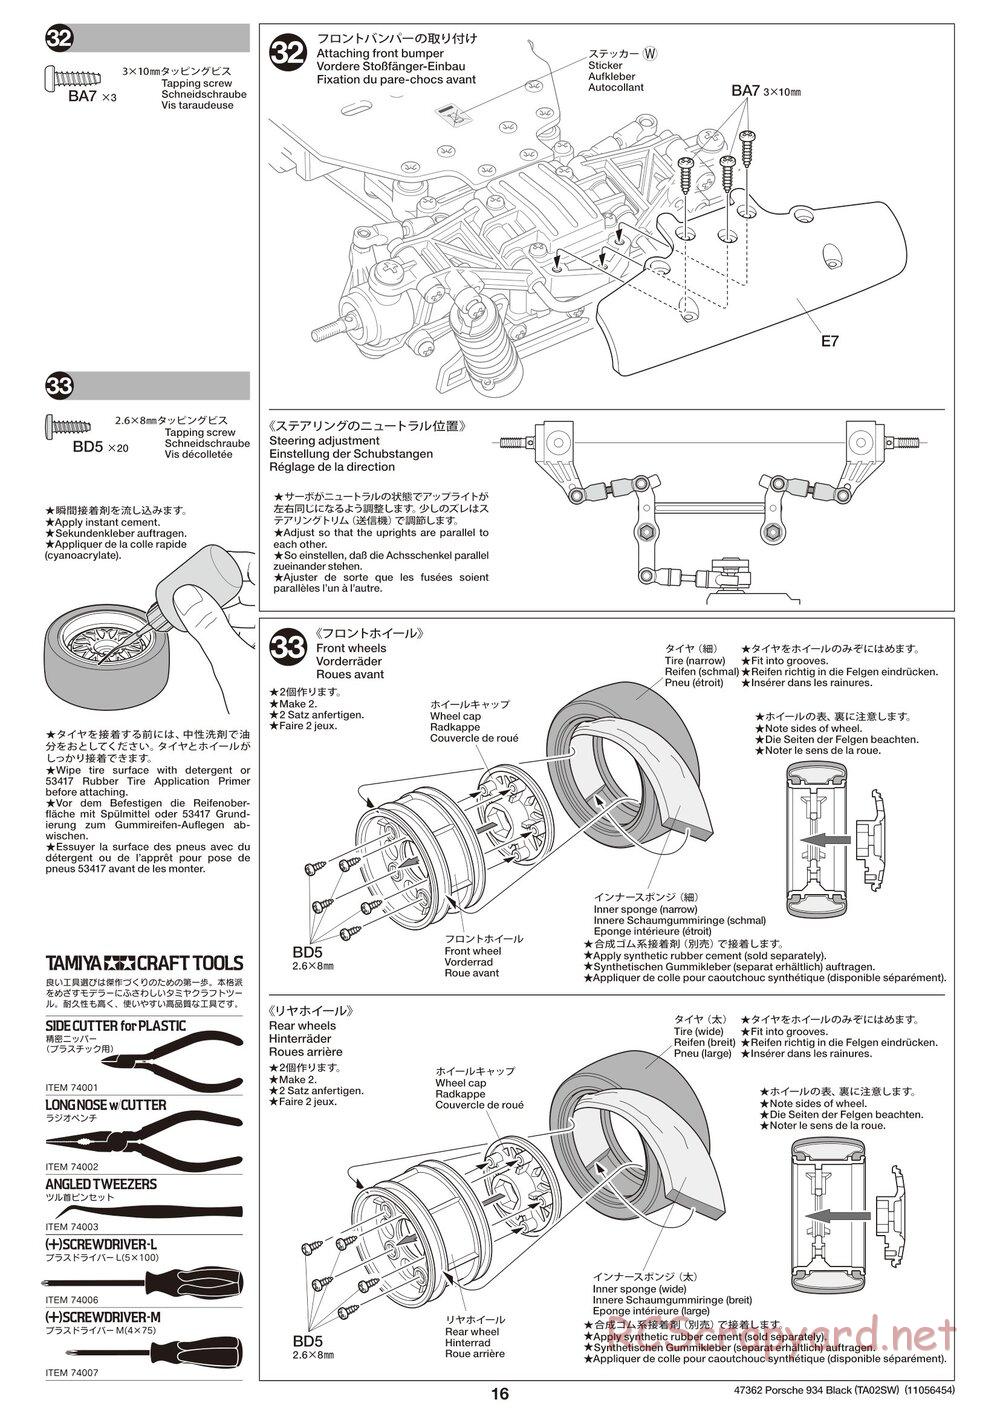 Tamiya - TT-02 White Special Chassis - Manual - Page 16